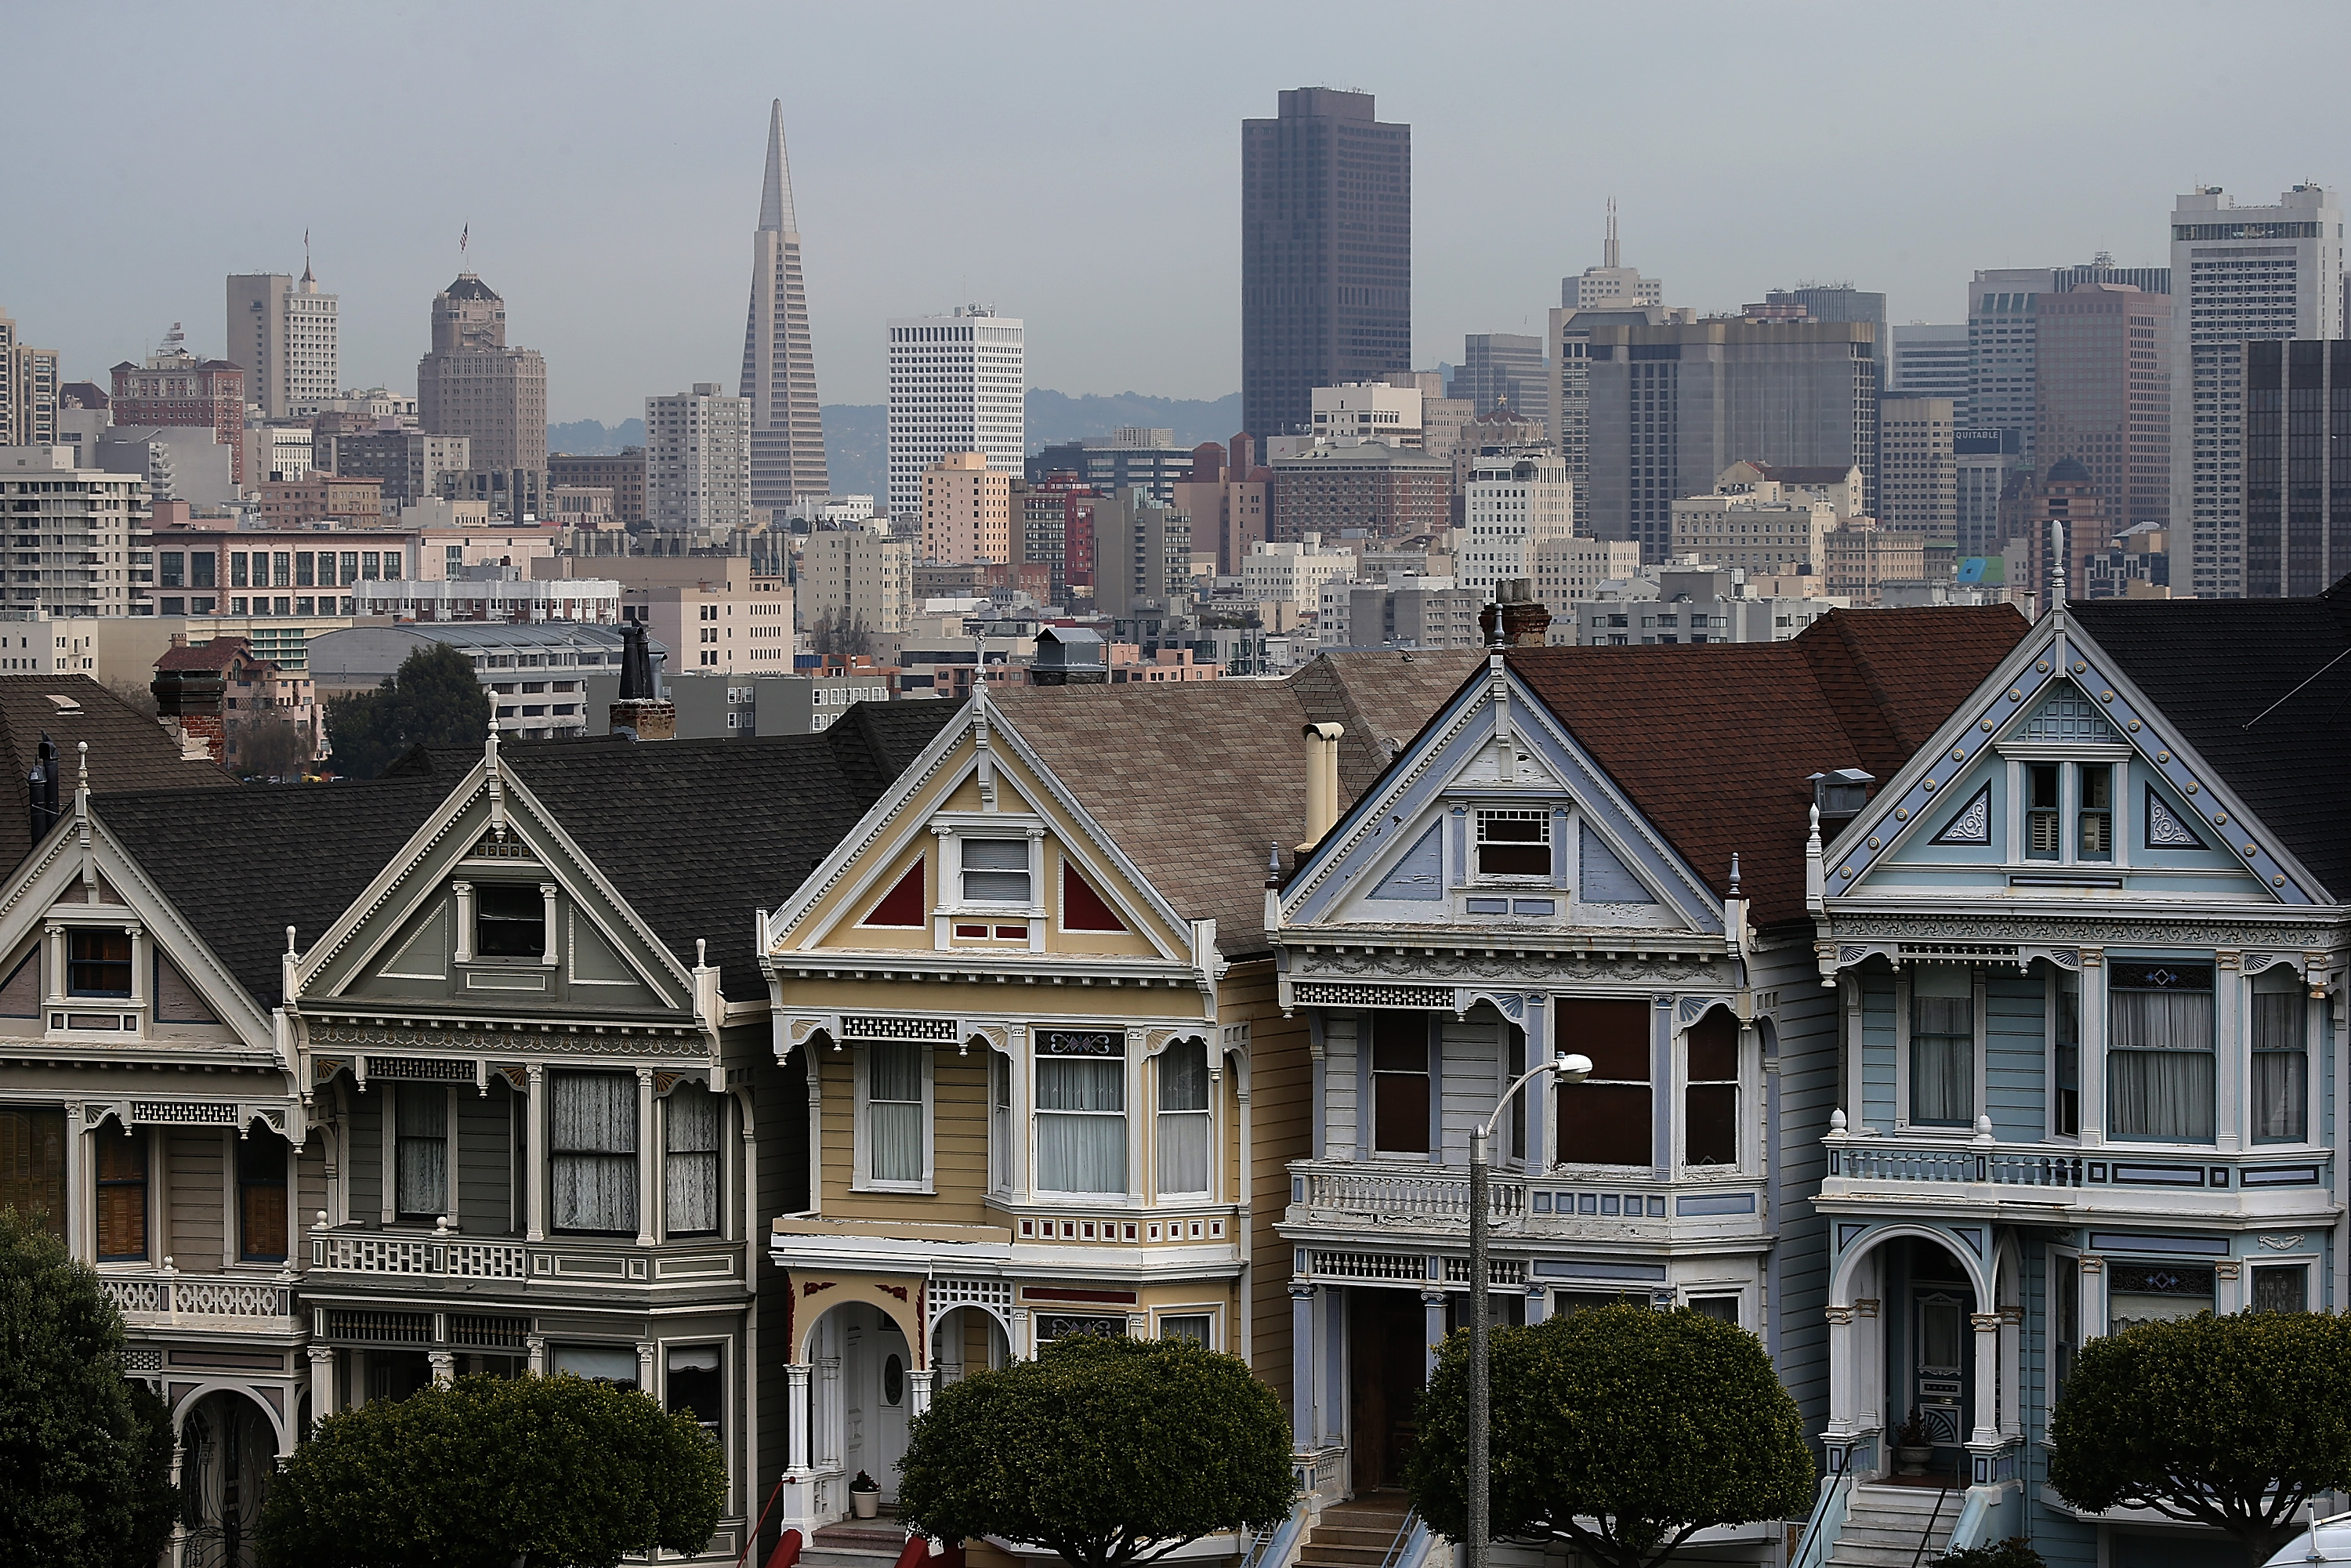 A view of San Francisco's famed Painted Ladies victorian houses on February 18, 2014 in San Francisco, California. According to a report by mortgage resource site HSH.com, an annual salary of $115,510 is needed to purchase a house in San Francisco where the median home price is $682,410. (Photo by Justin Sullivan/Getty Images)